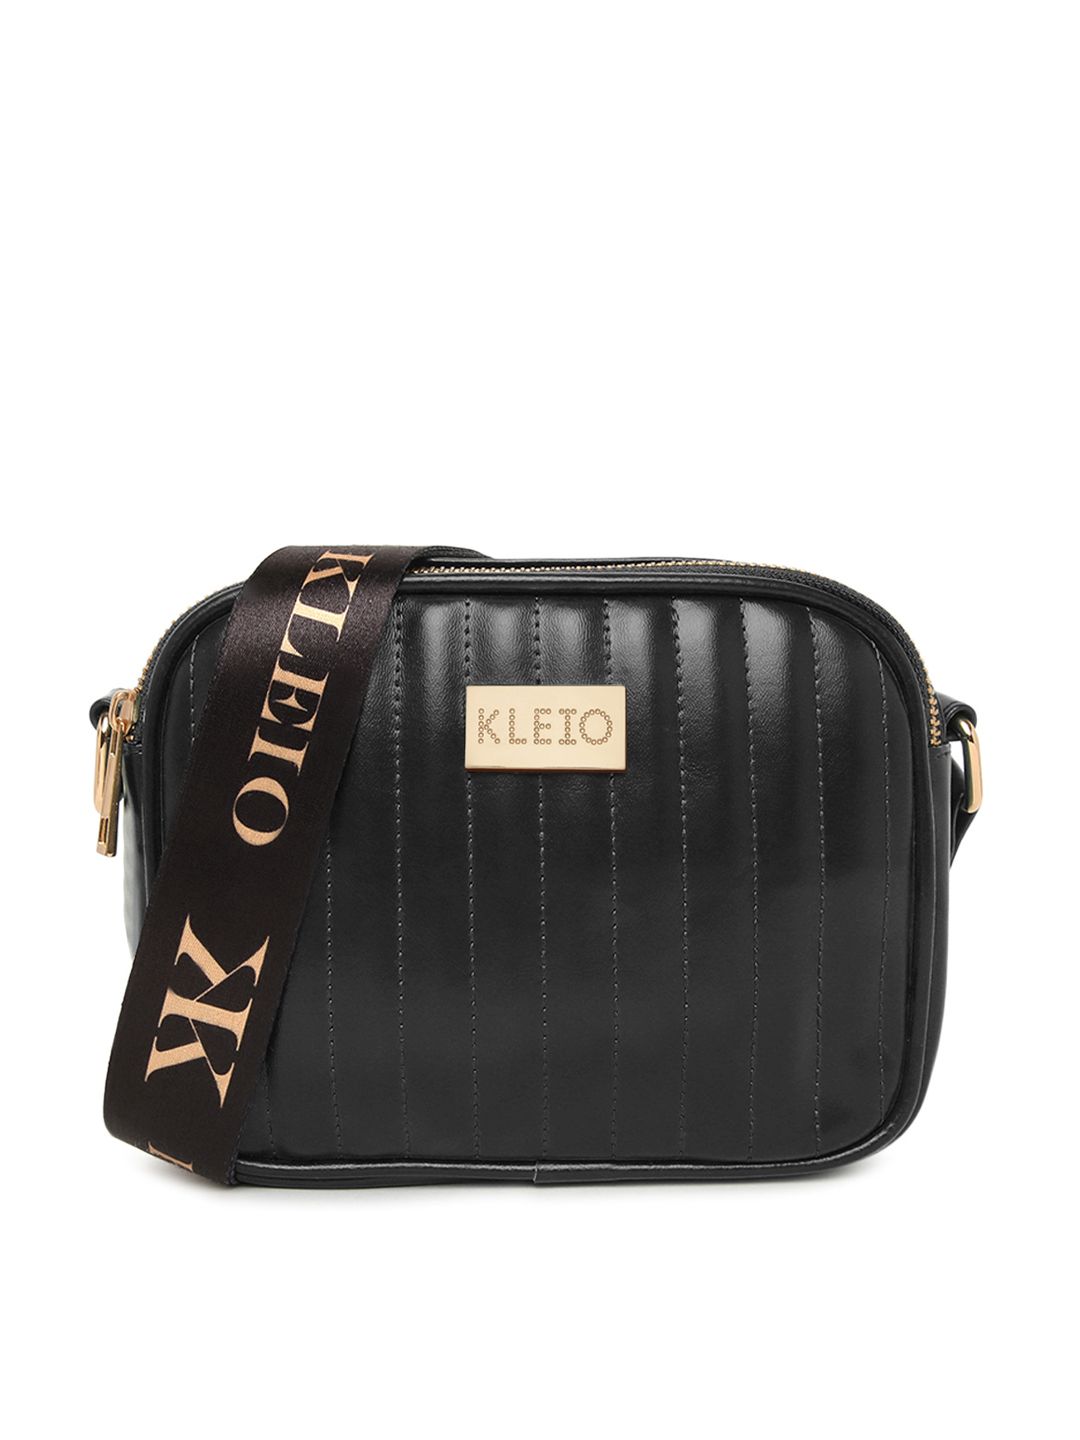 KLEIO Black PU Structured Sling Bag with Quilted Price in India